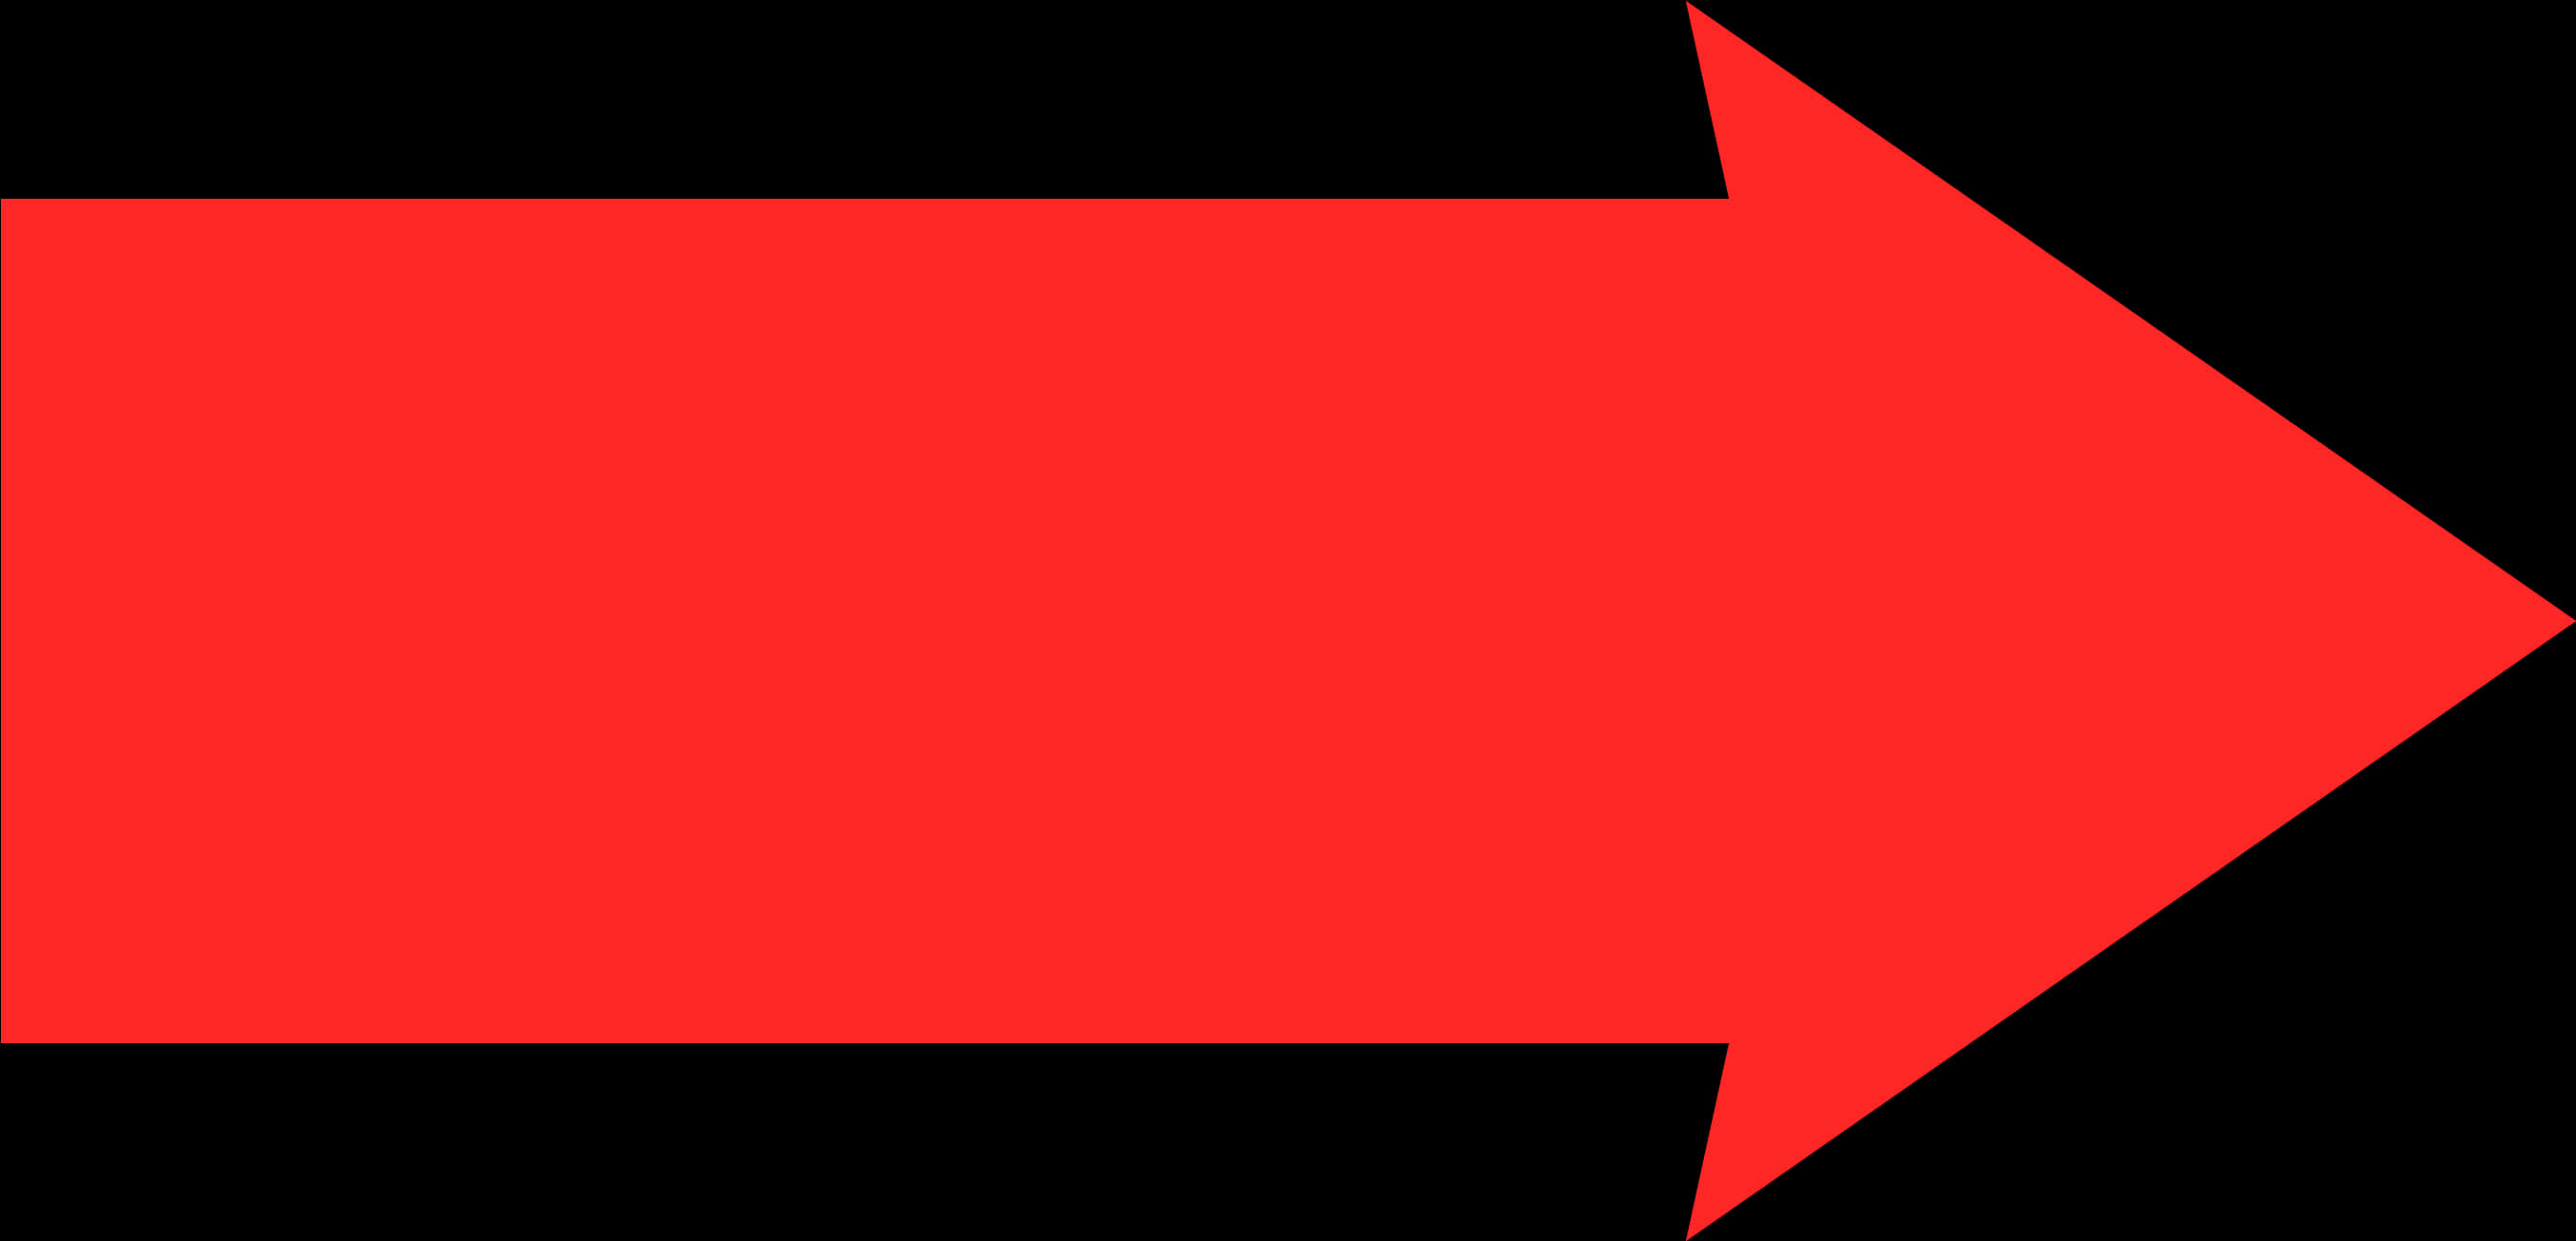 Red Black Arrow Graphic PNG